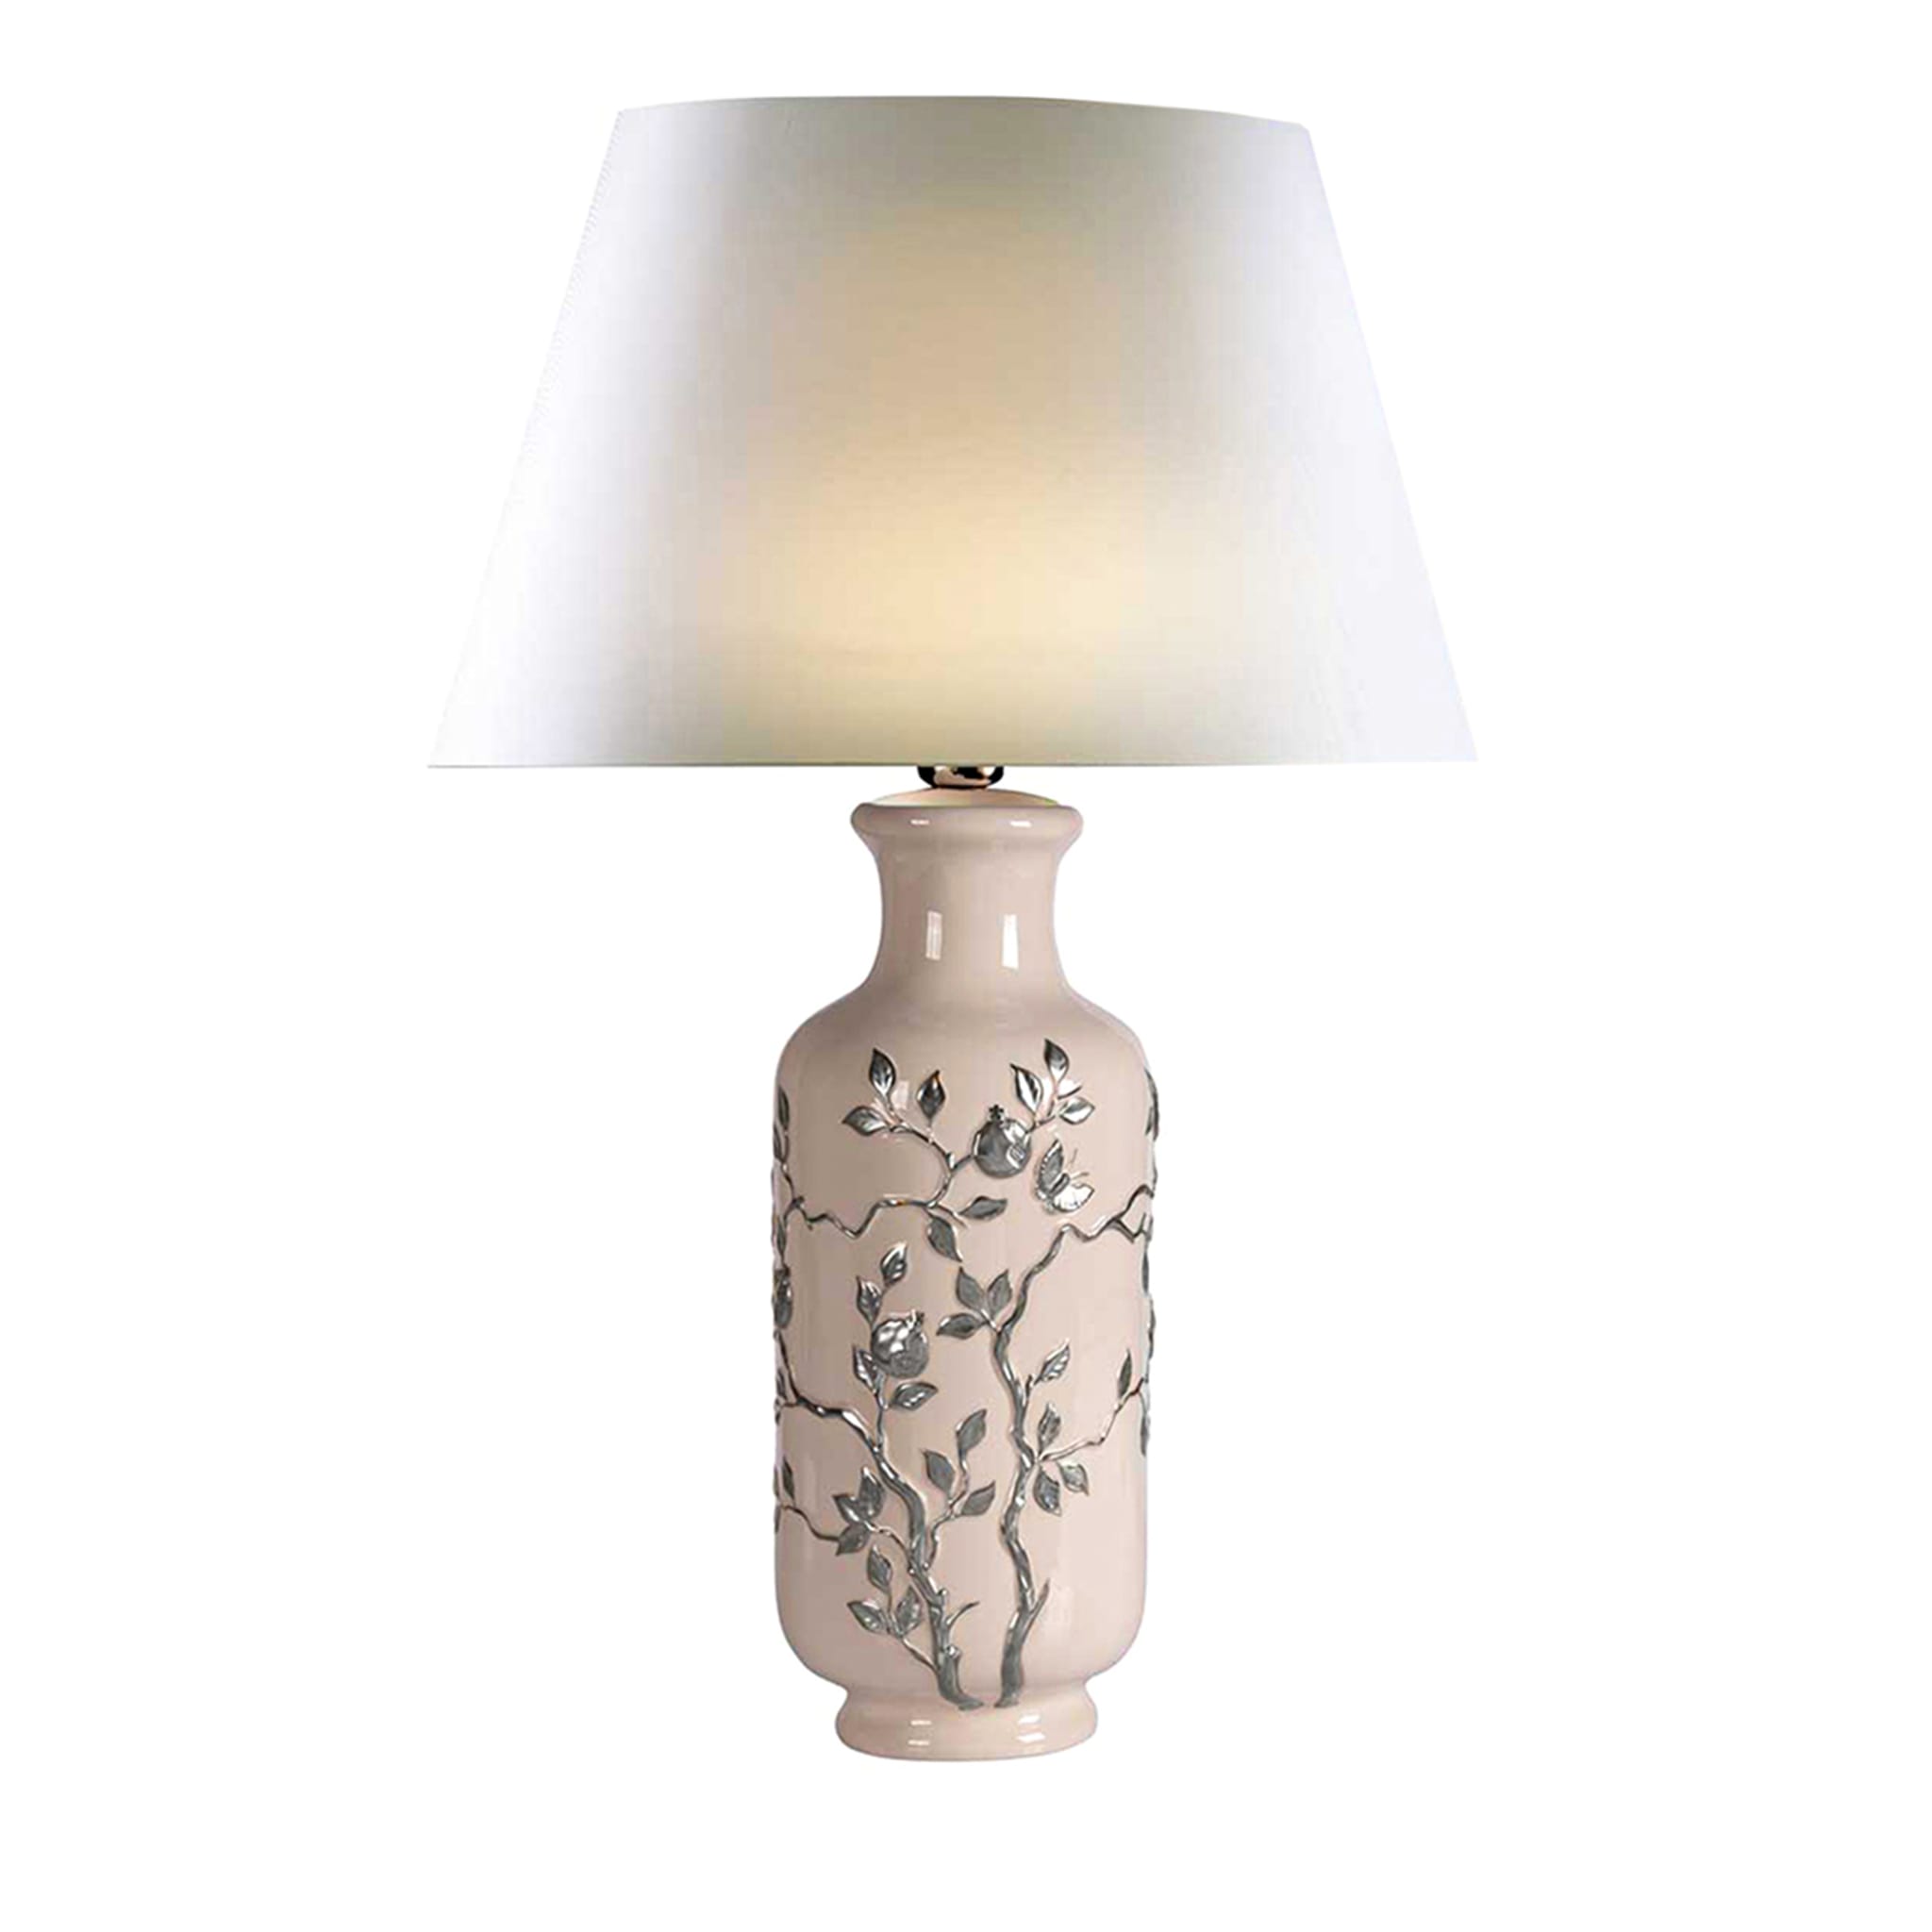 Dafne Small White and Silver Table Lamp - Main view